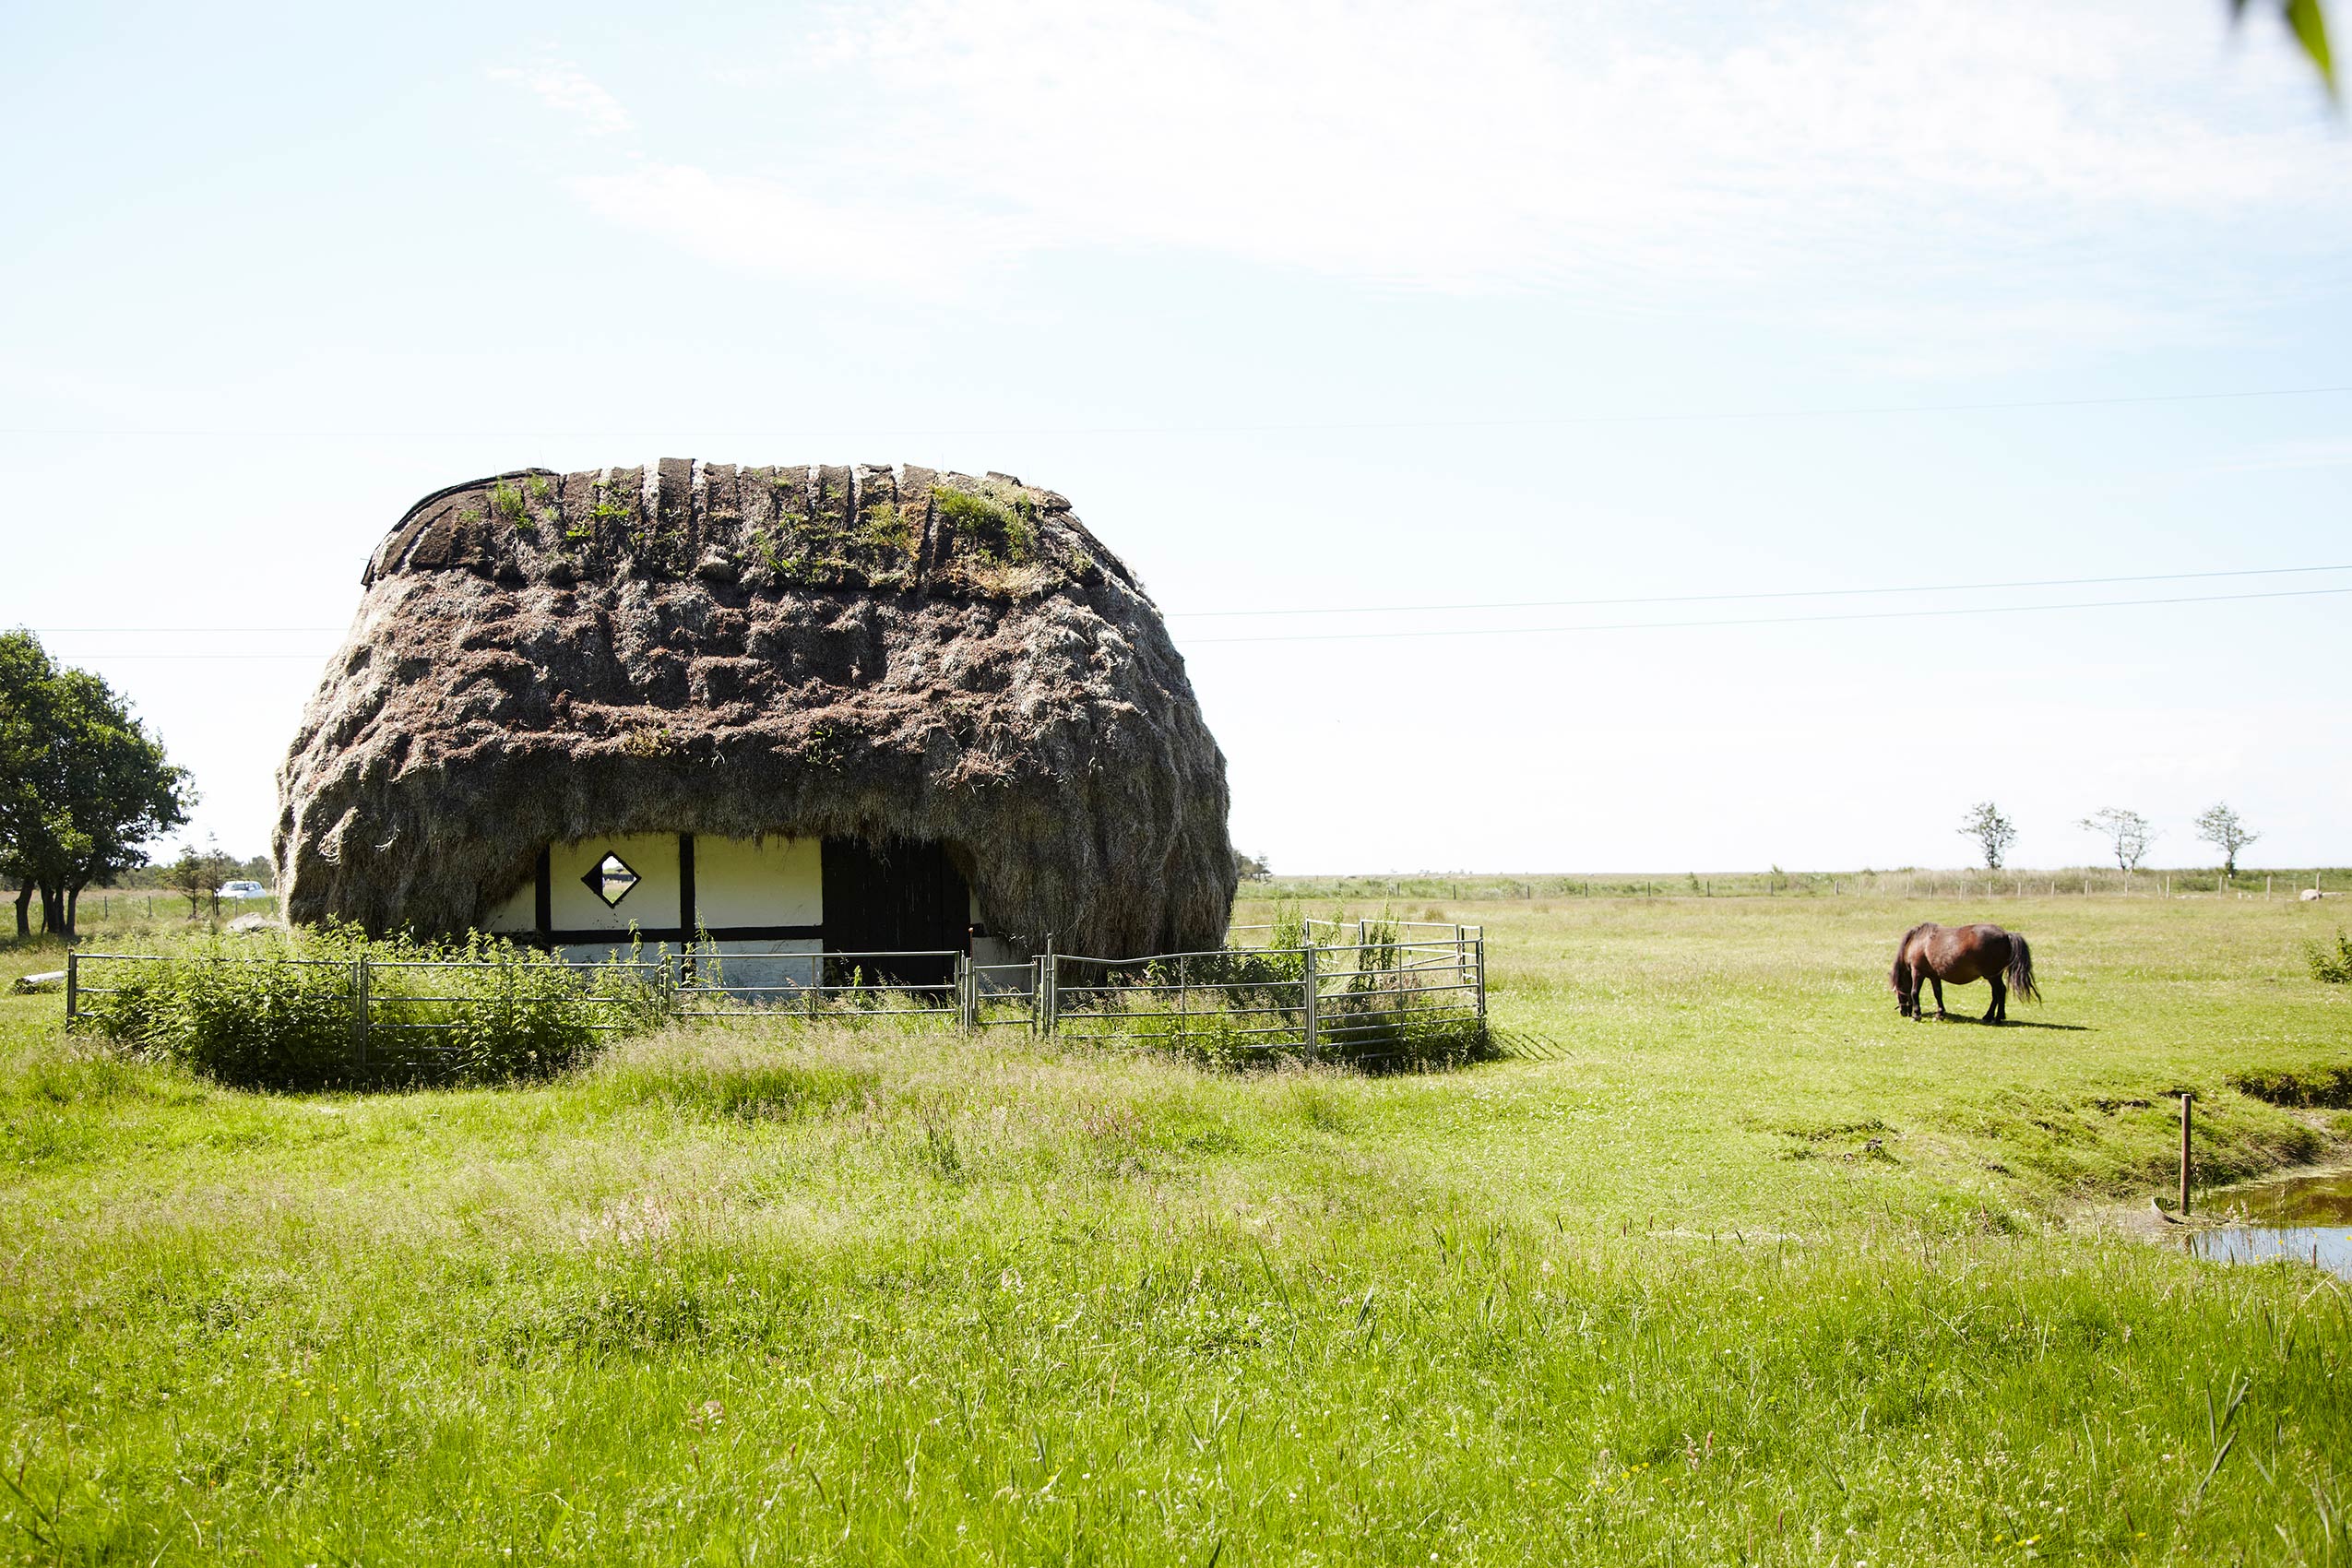 Laesoe Salt • Natural Thatched Roof Danish Hut in Meadow • Advertising & Lifestyle Food Photography